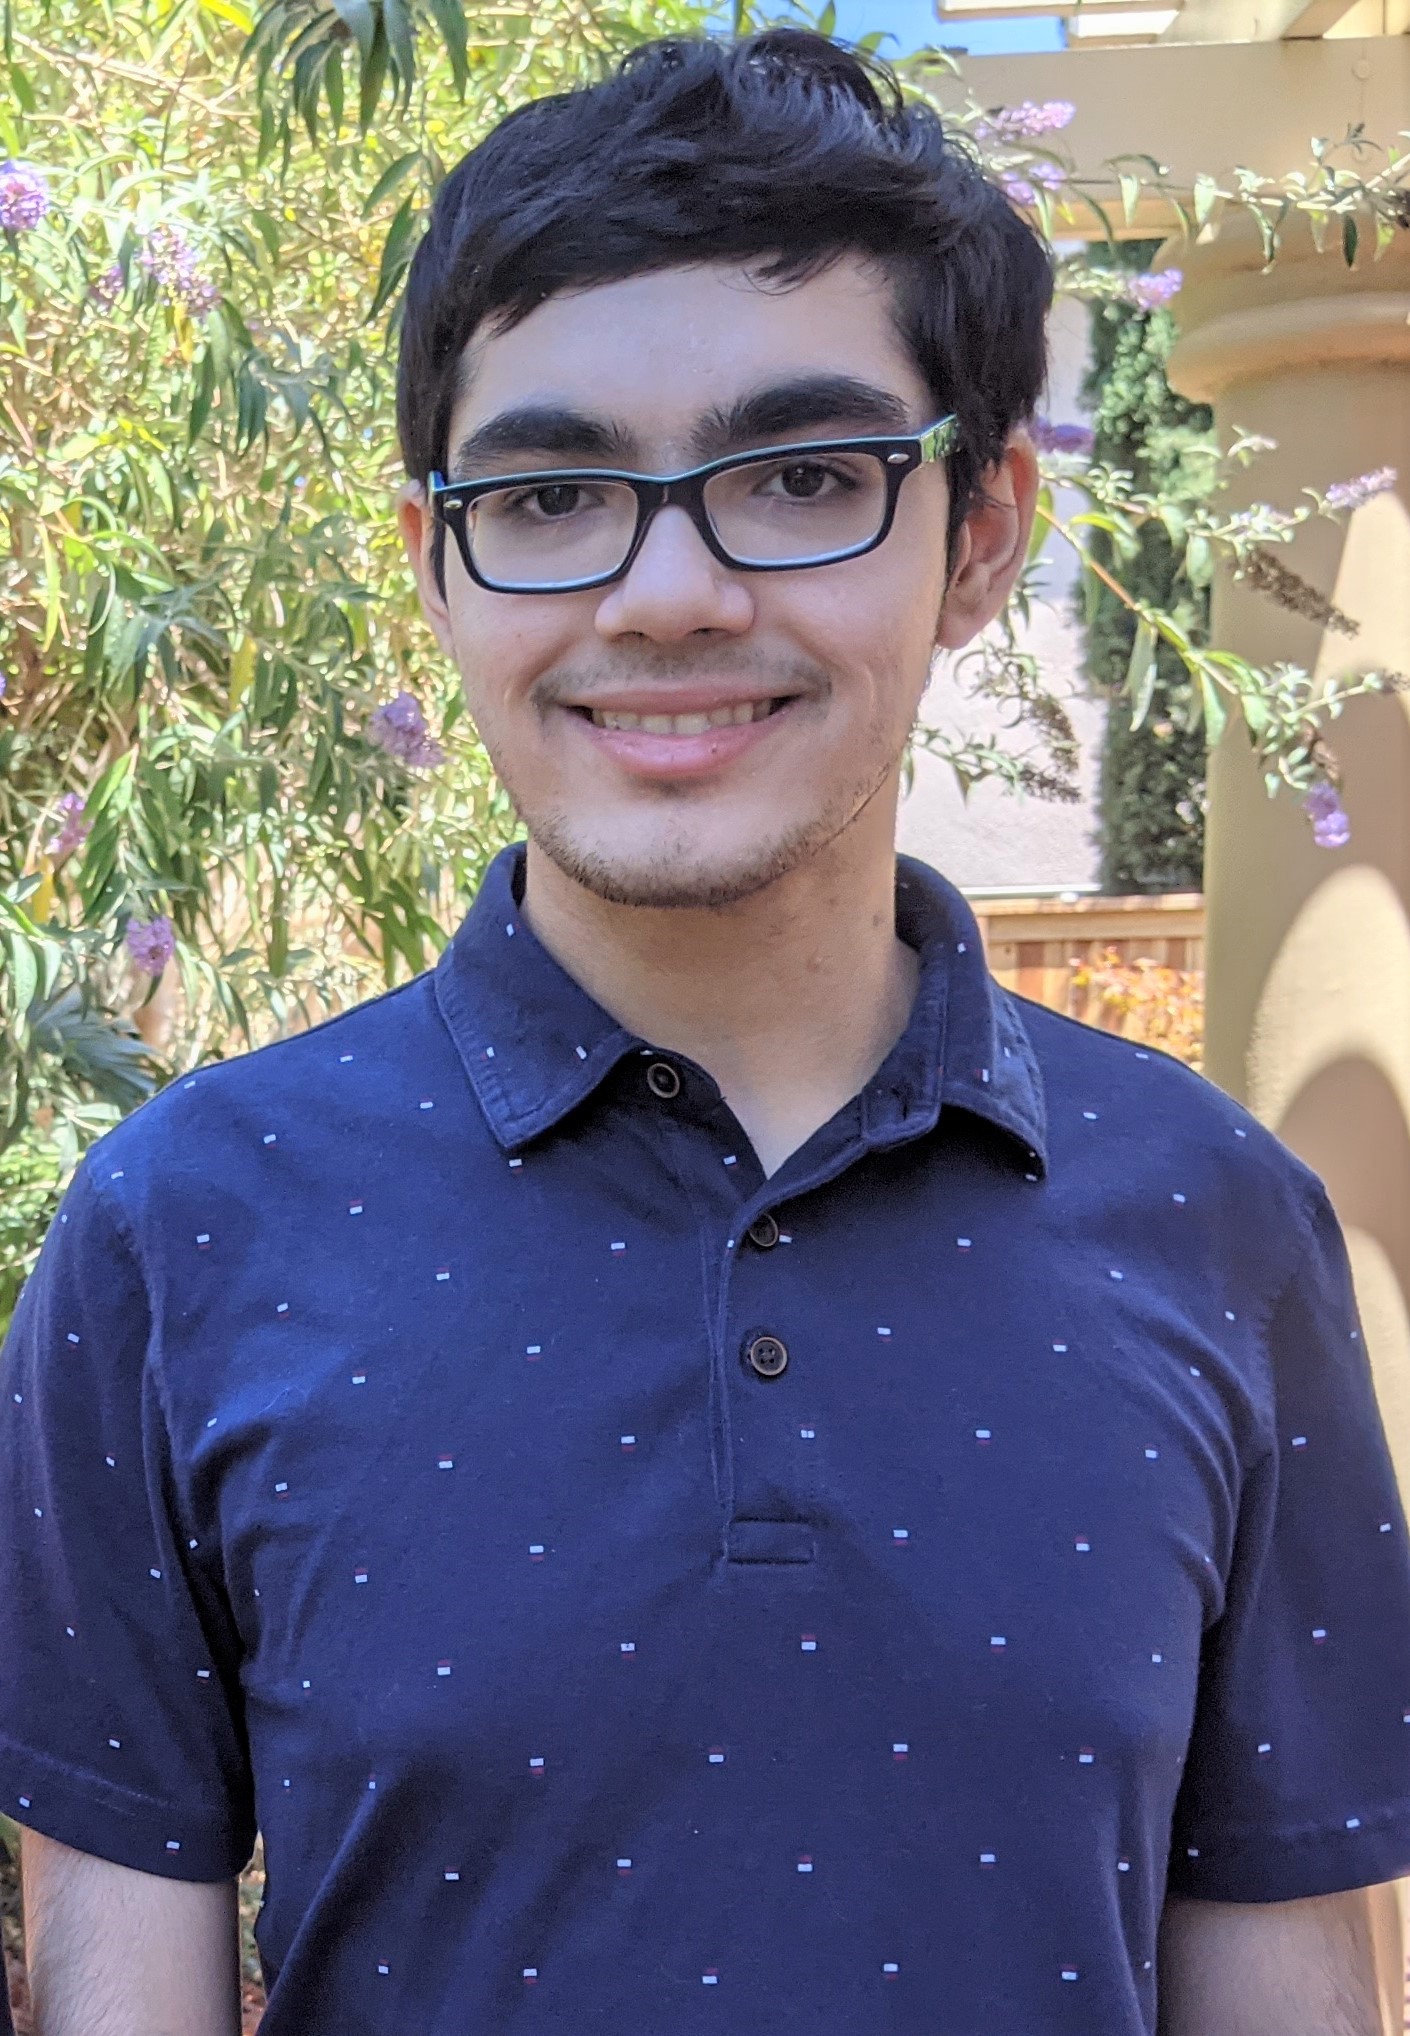 A young light-skinned man with glasses and a dark polo shirt